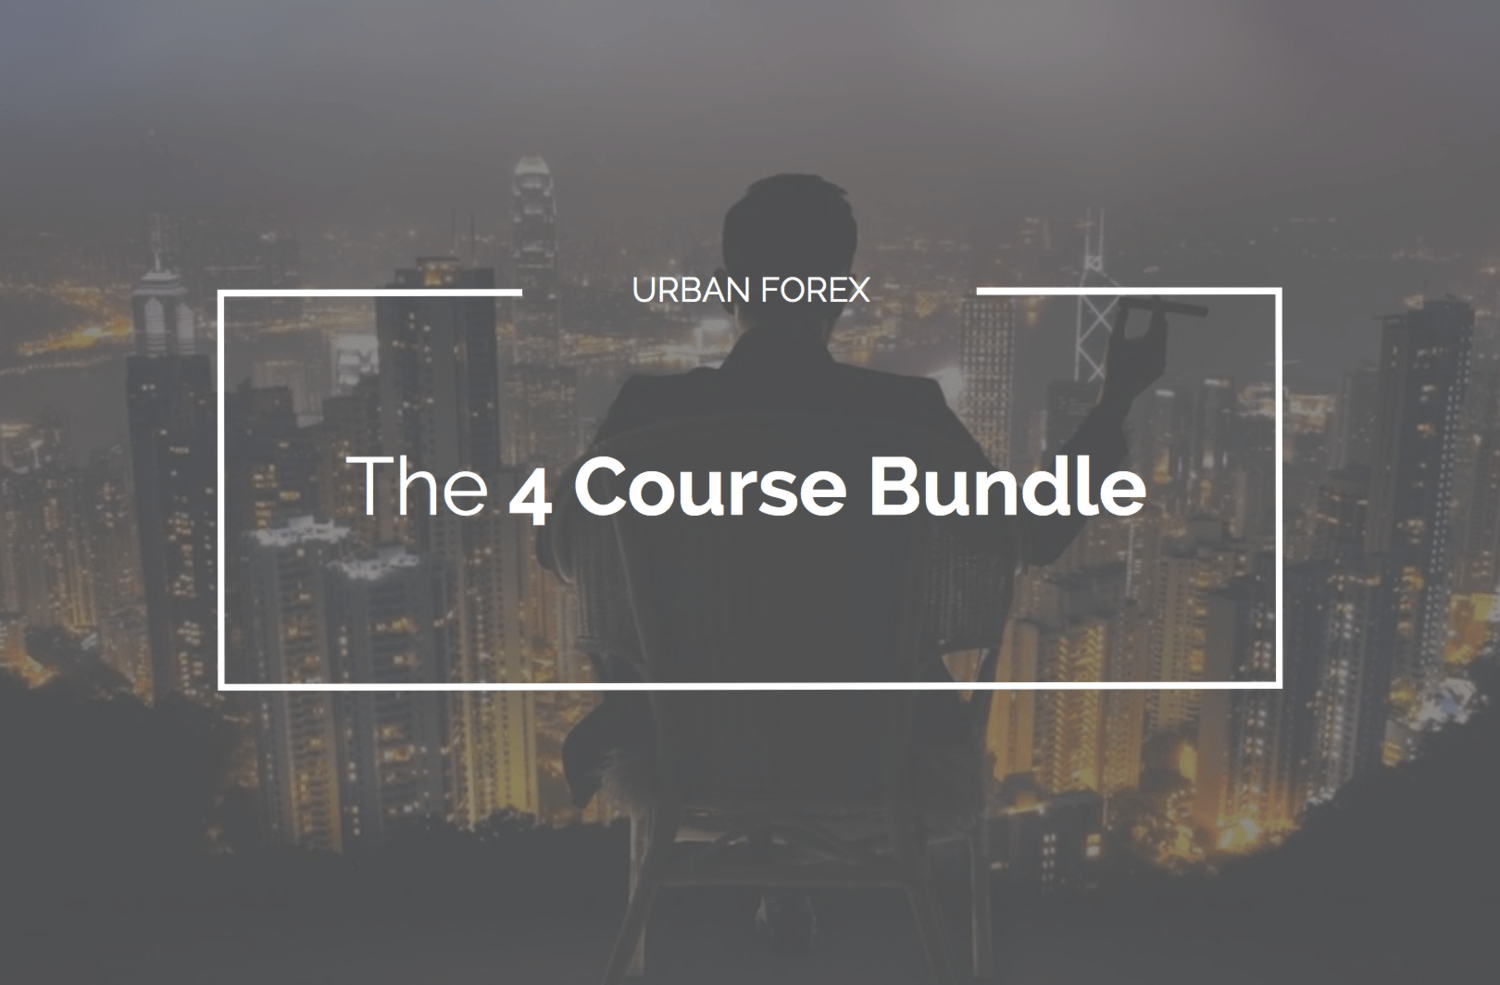 [SUPER HOT SHARE] Urban Forex – The 4 Course Bundle Download